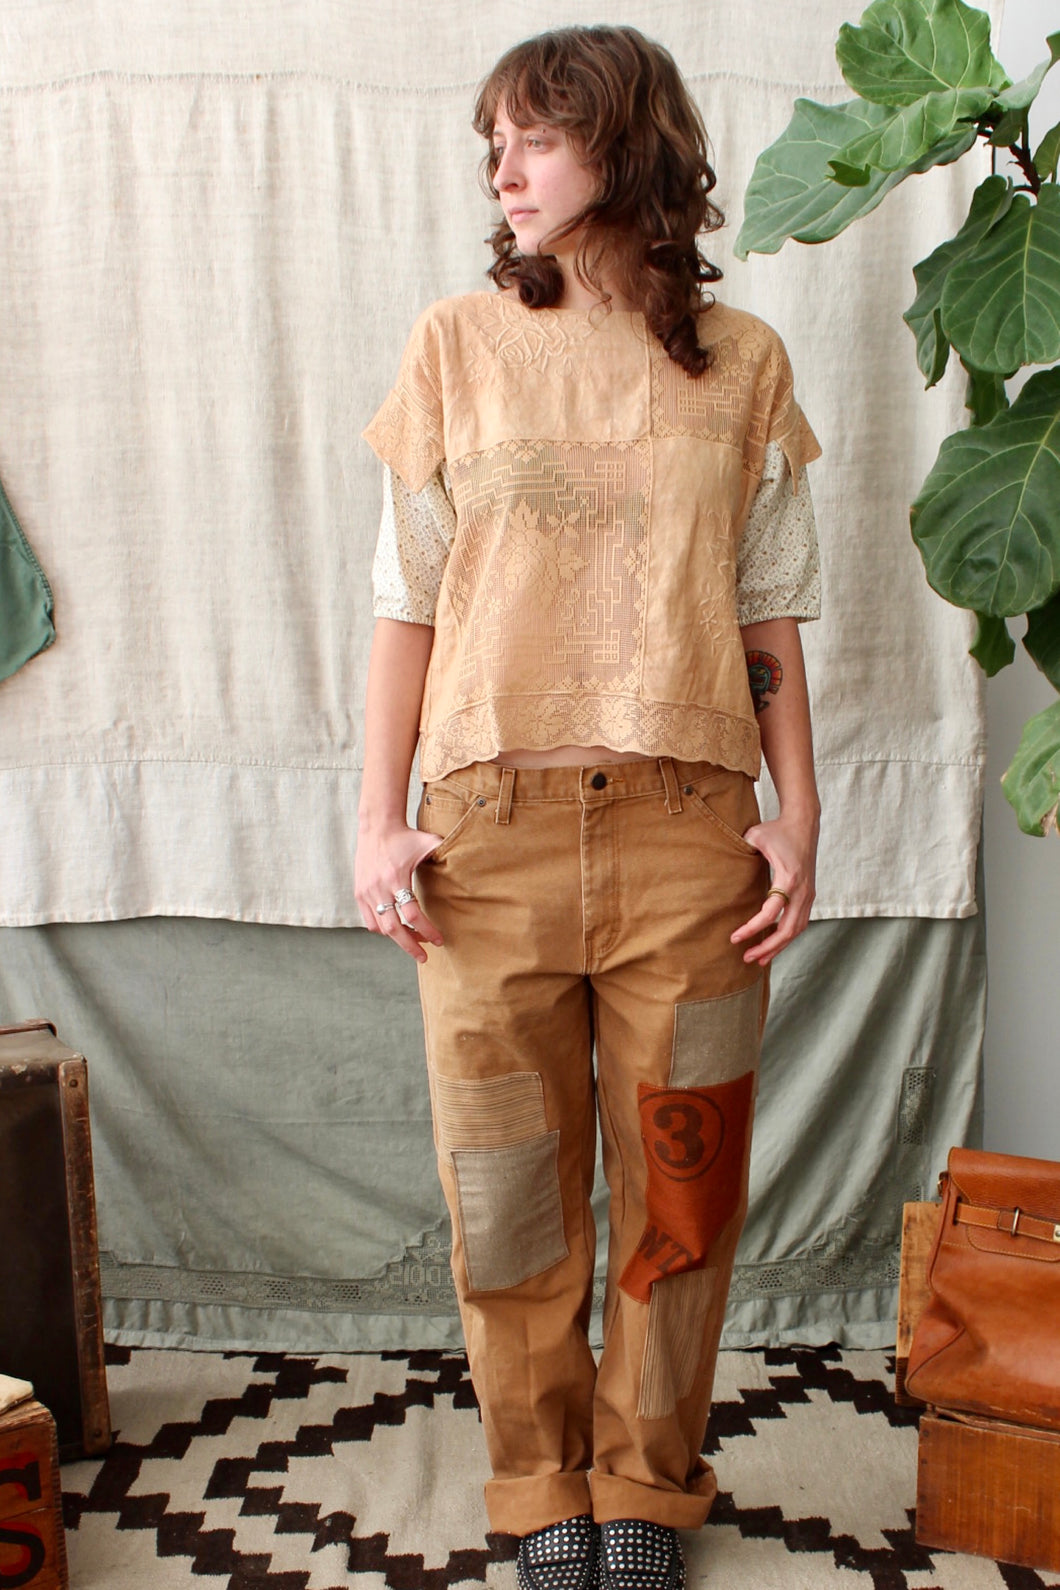 HF173 The Highlands Foundry Natural Cutch Dyed Lace Top